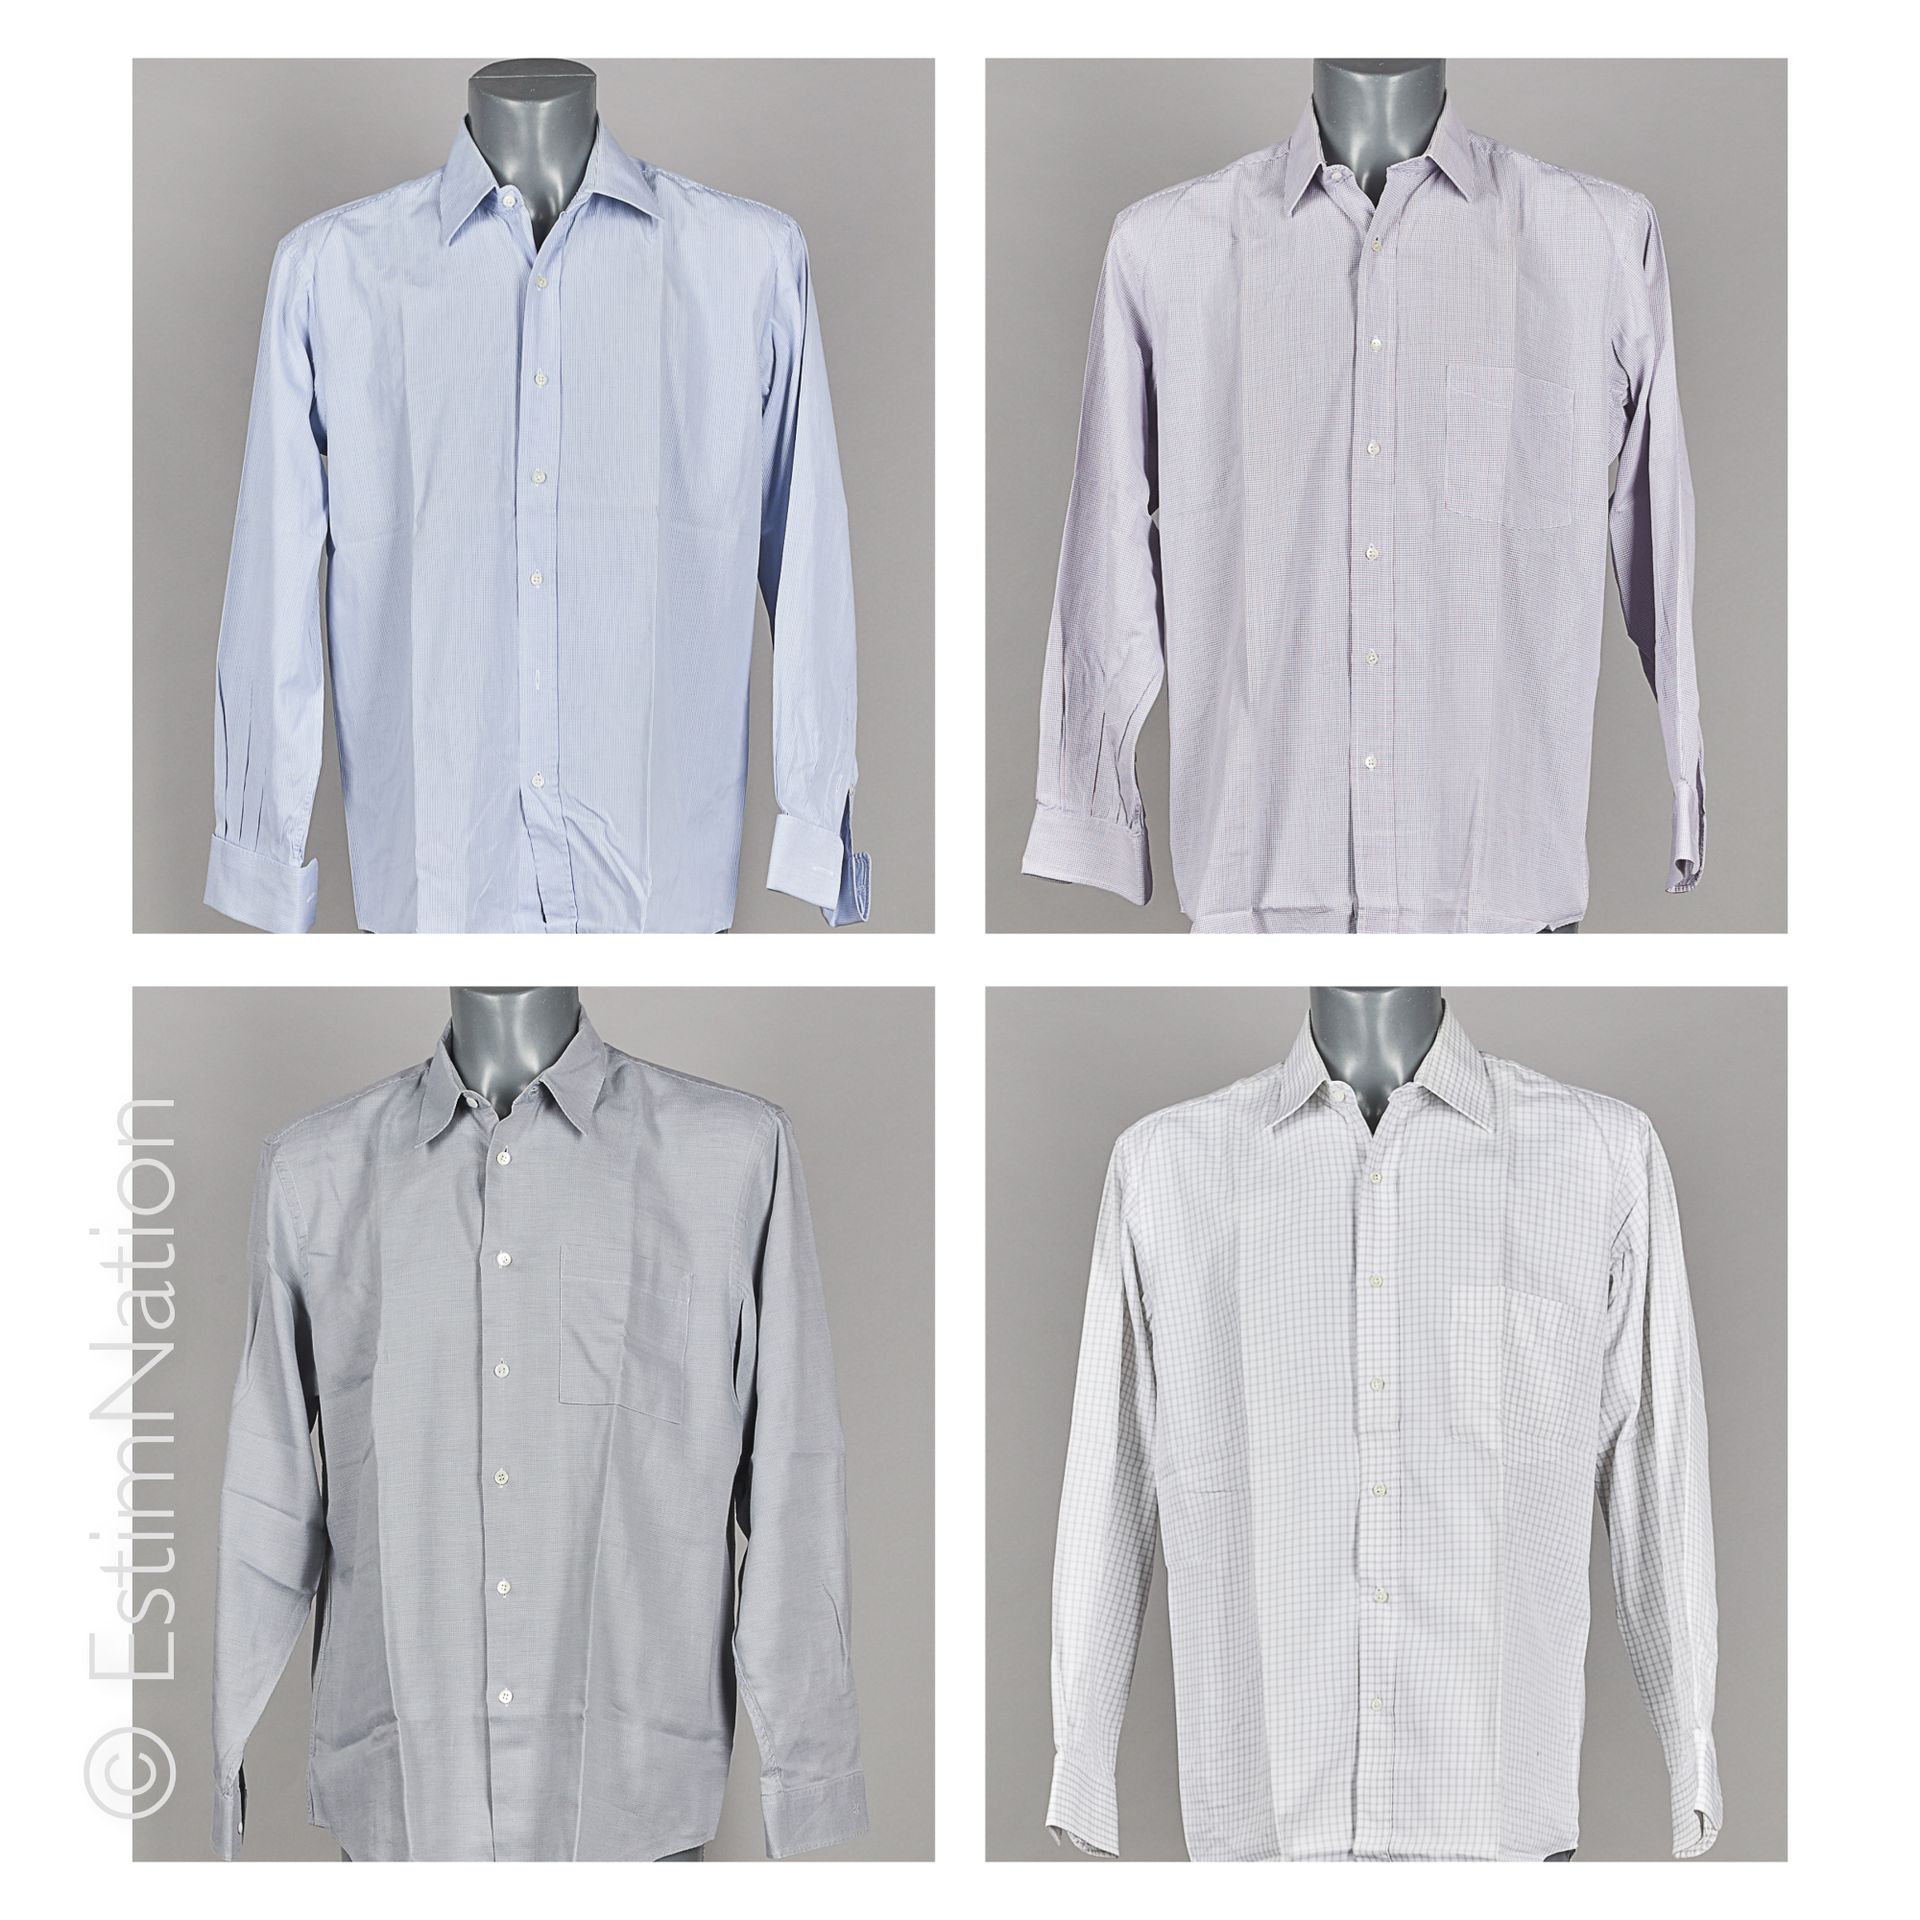 CALVIN KLEIN, ALAIN FIGARET FIVE cotton SHIRTS : the first one with small grey c&hellip;